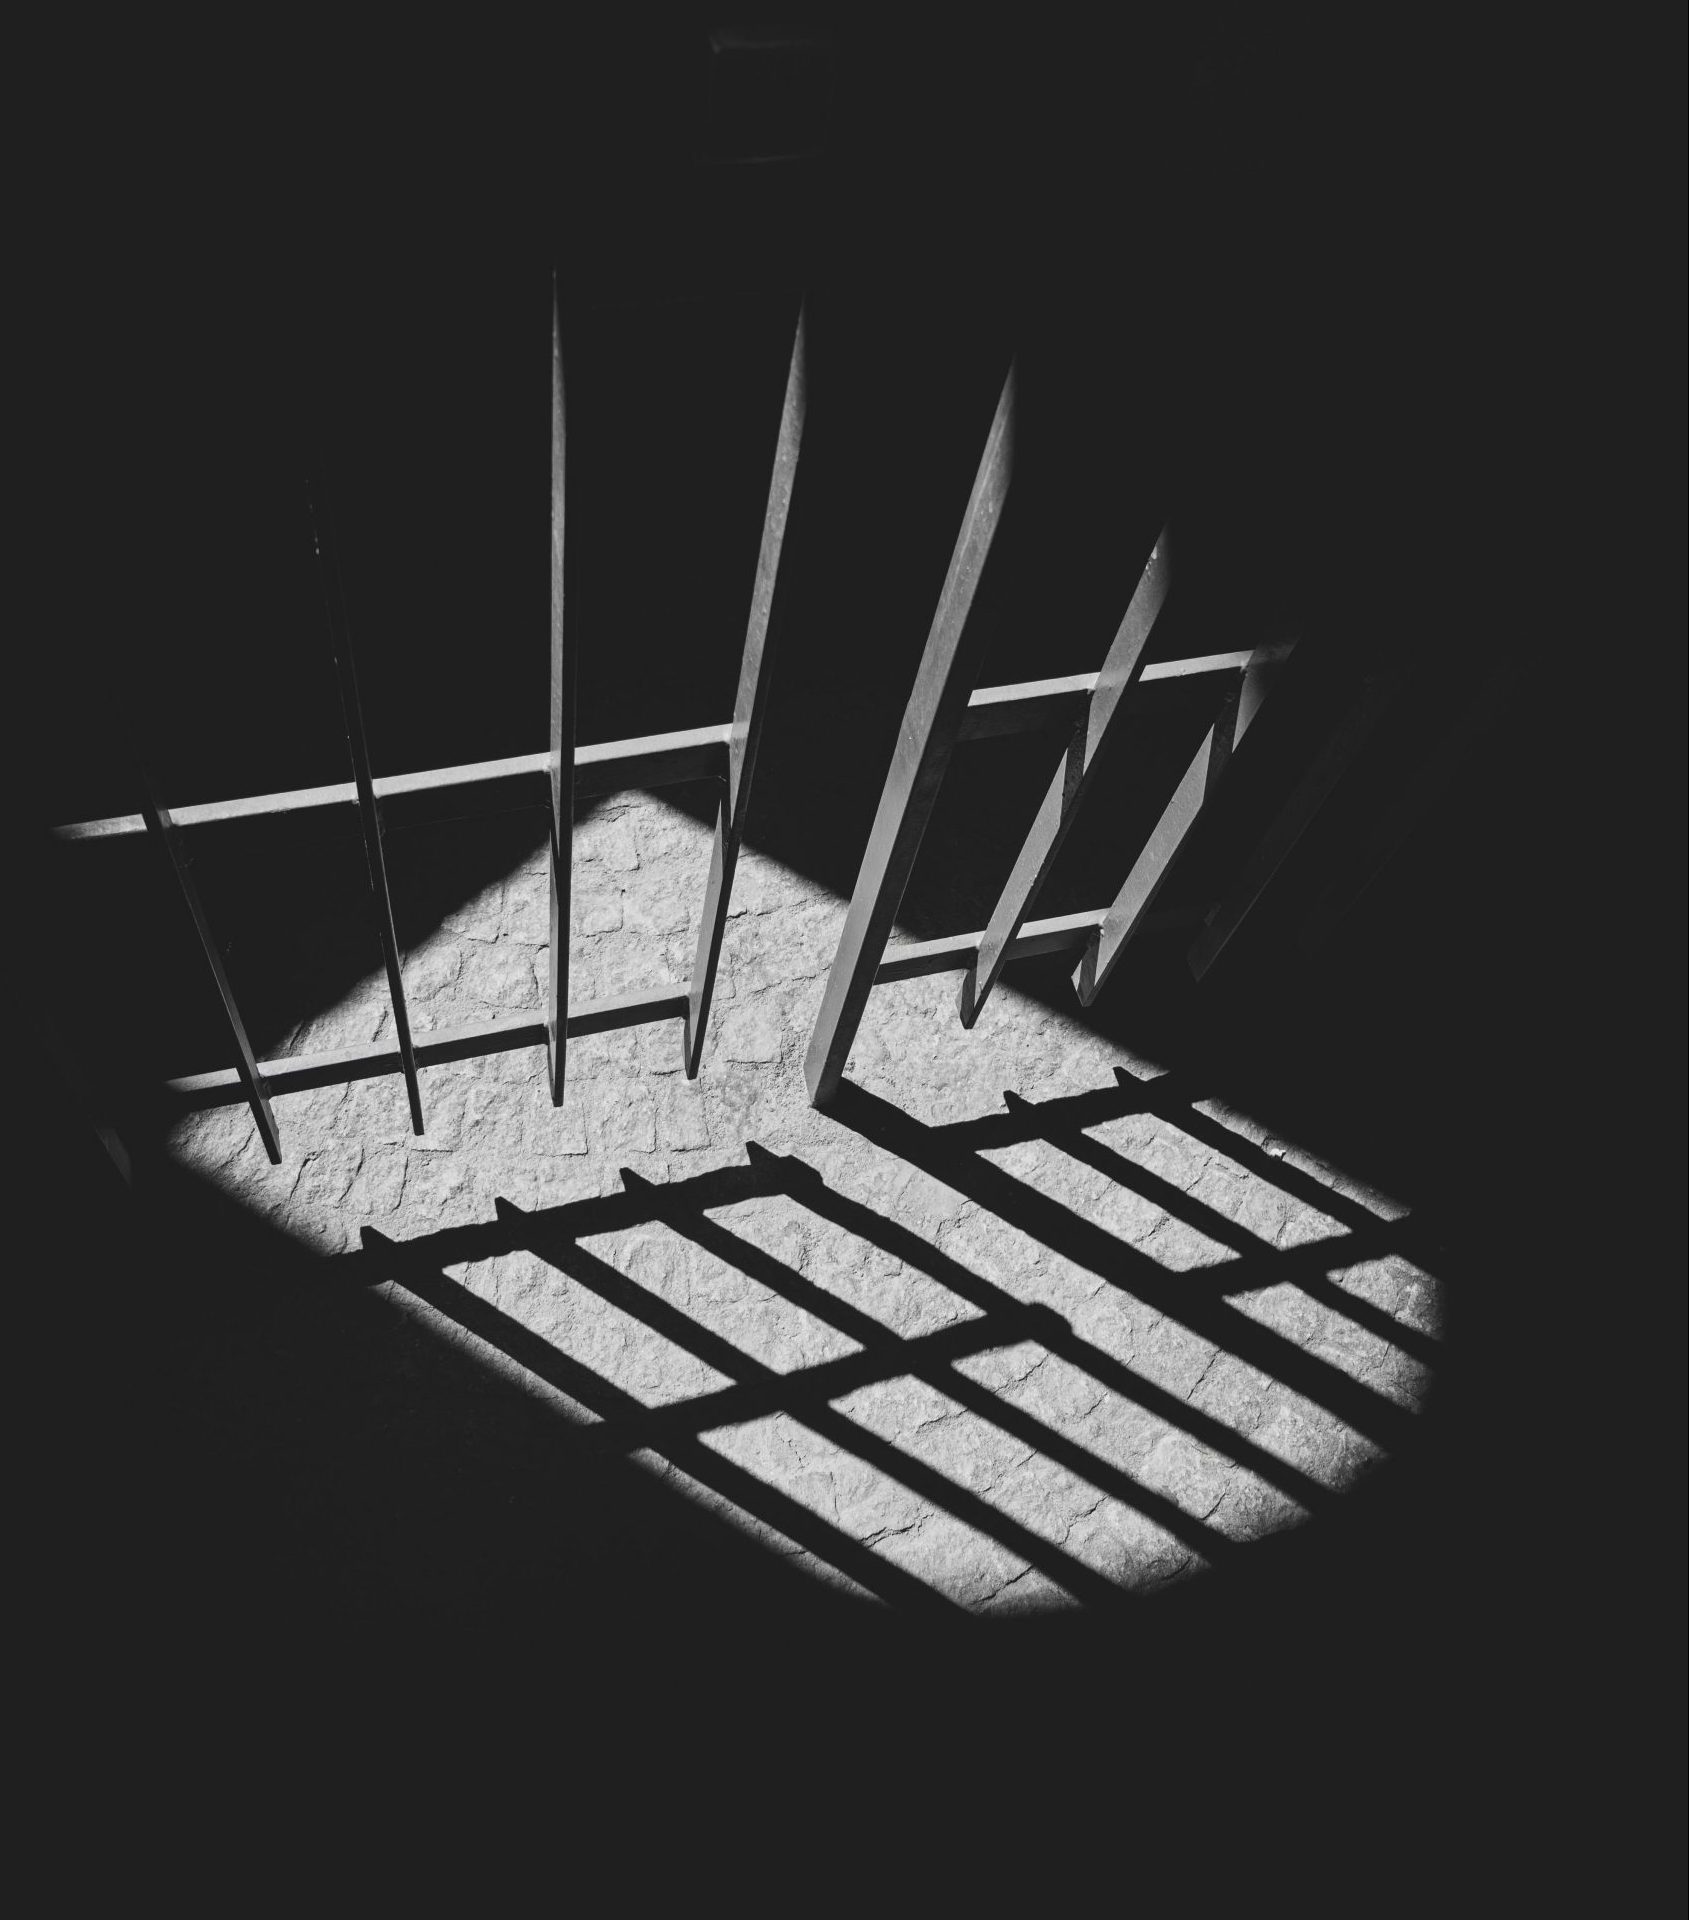 The Prison Glossary from Falling